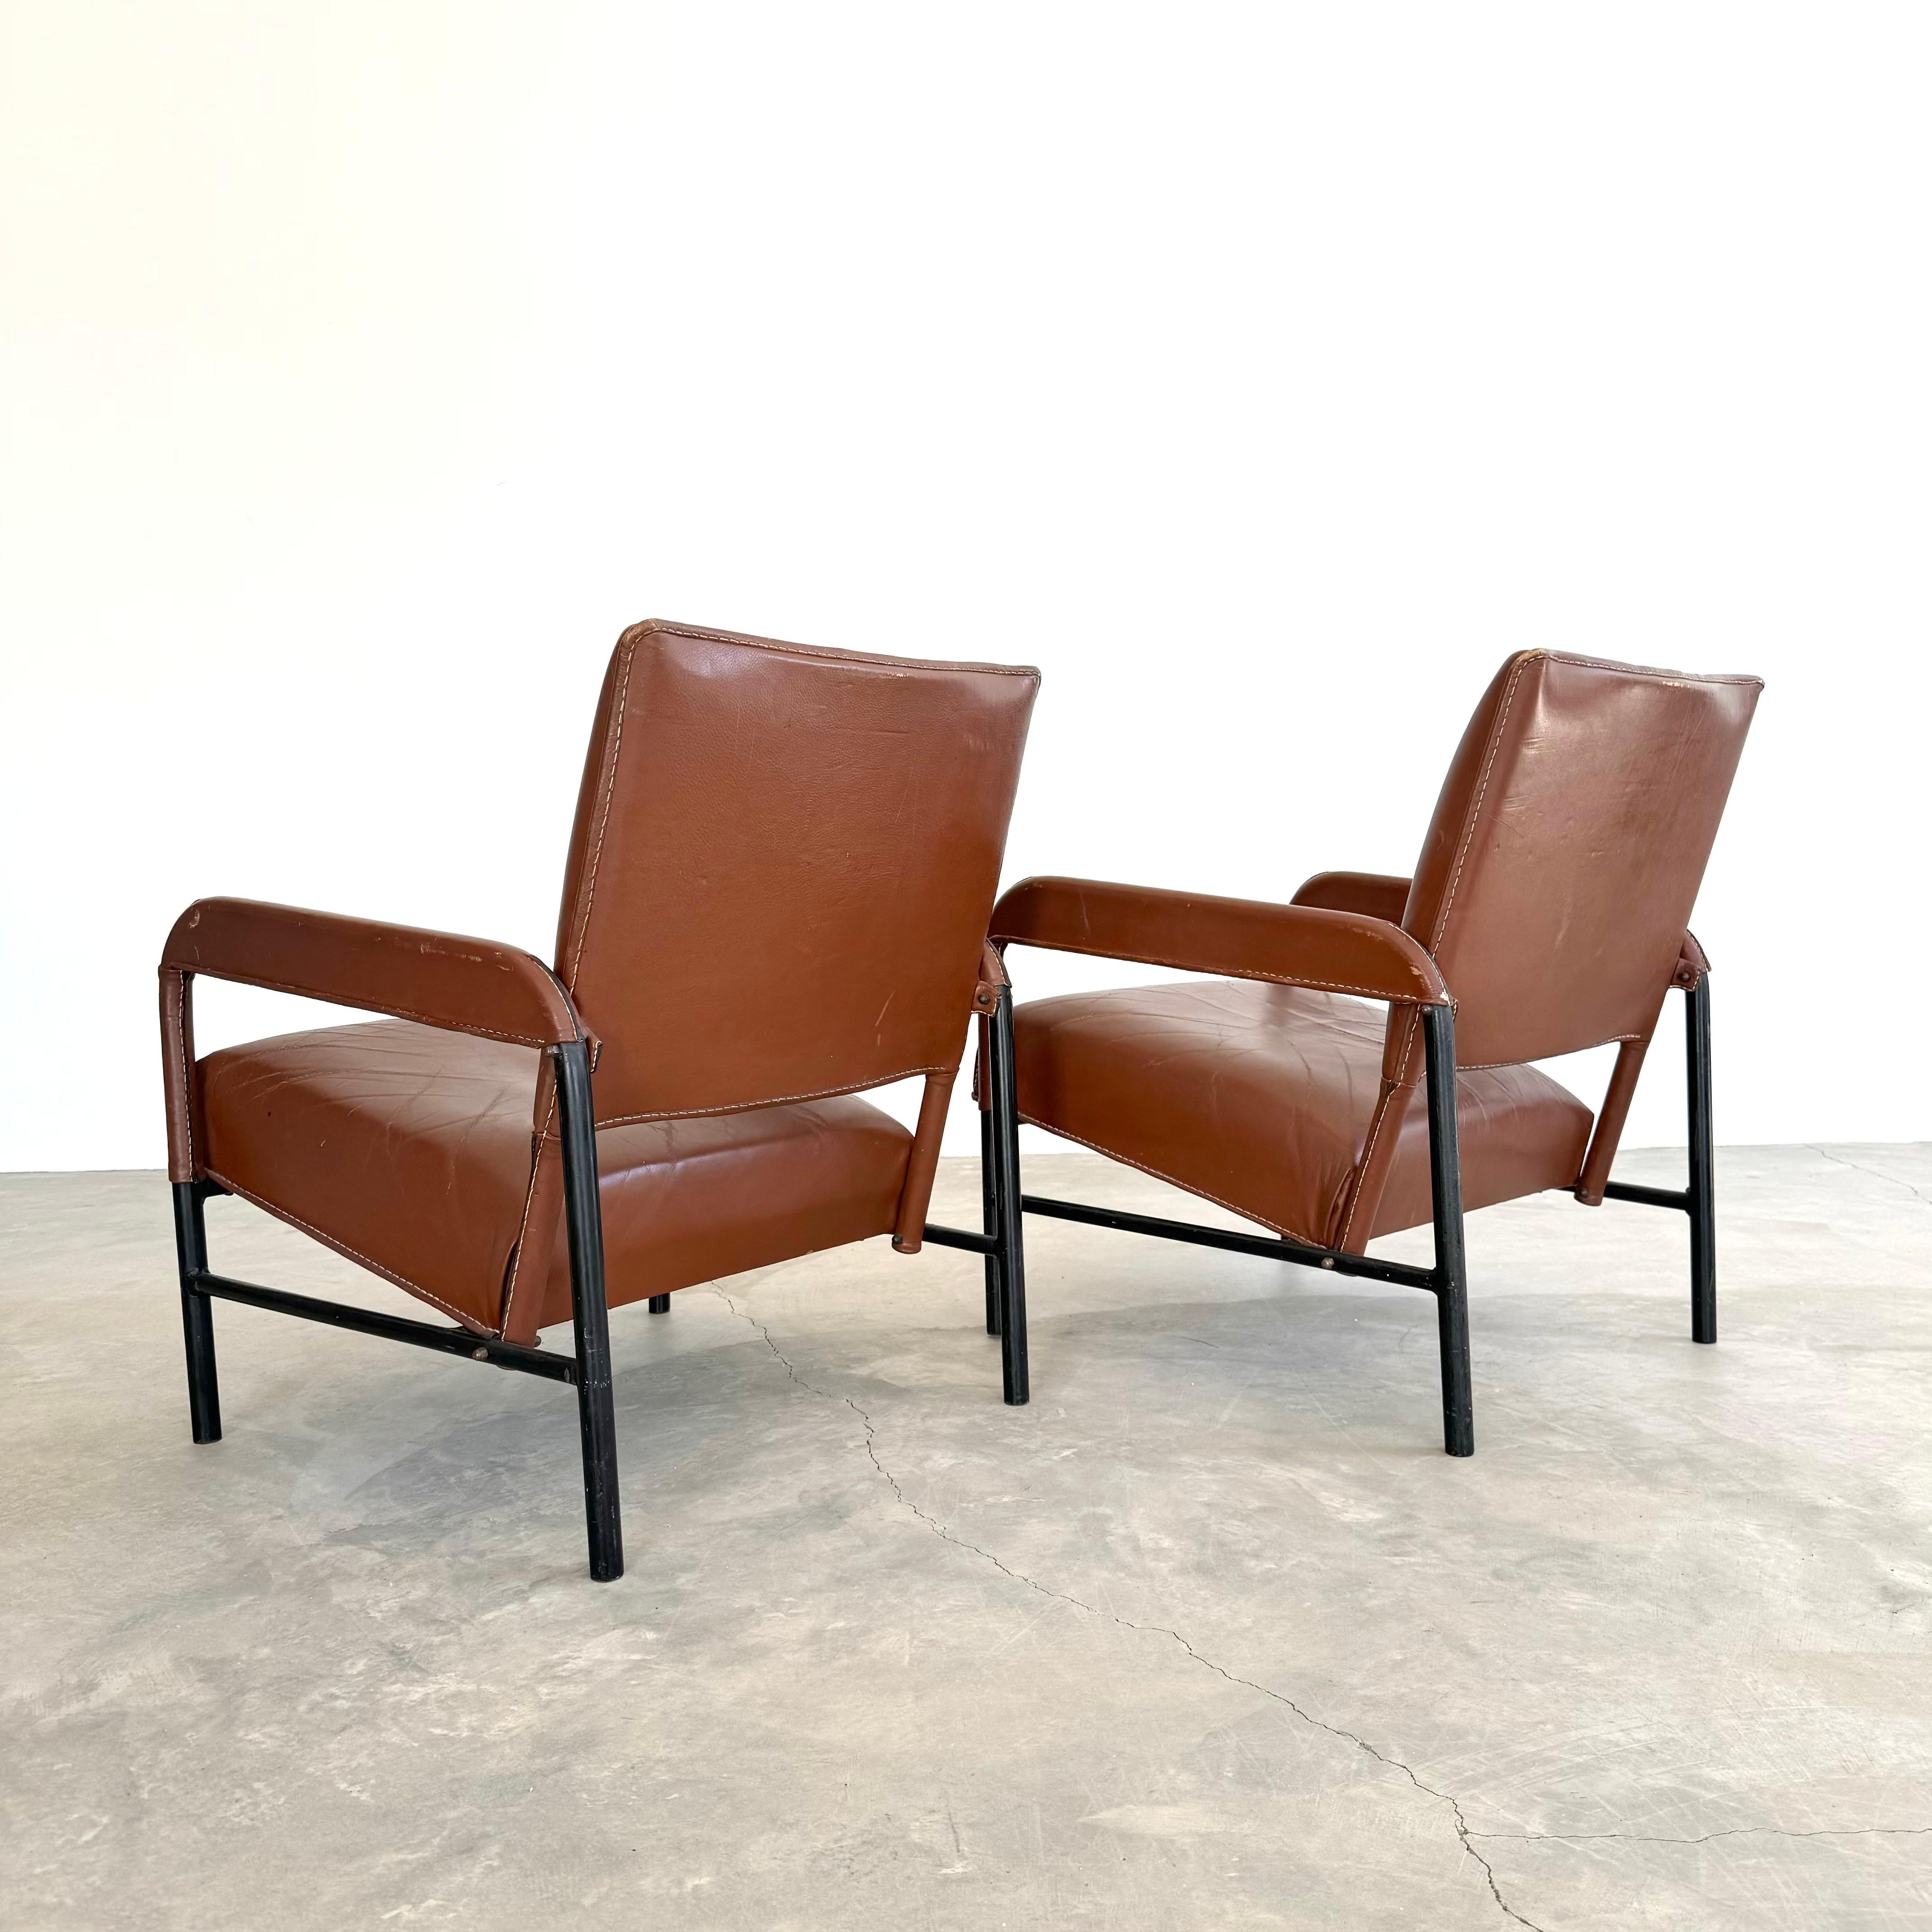 Pair of Saddle Leather and Iron Armchairs by Jacques Adnet, 1950s France For Sale 1